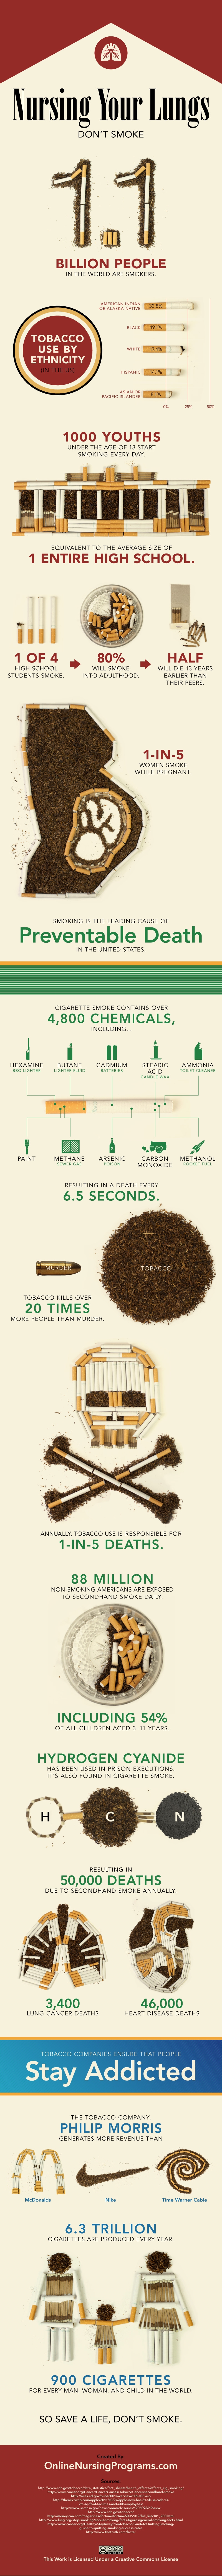 Quit Smoking: Infographic About Smoking In The US